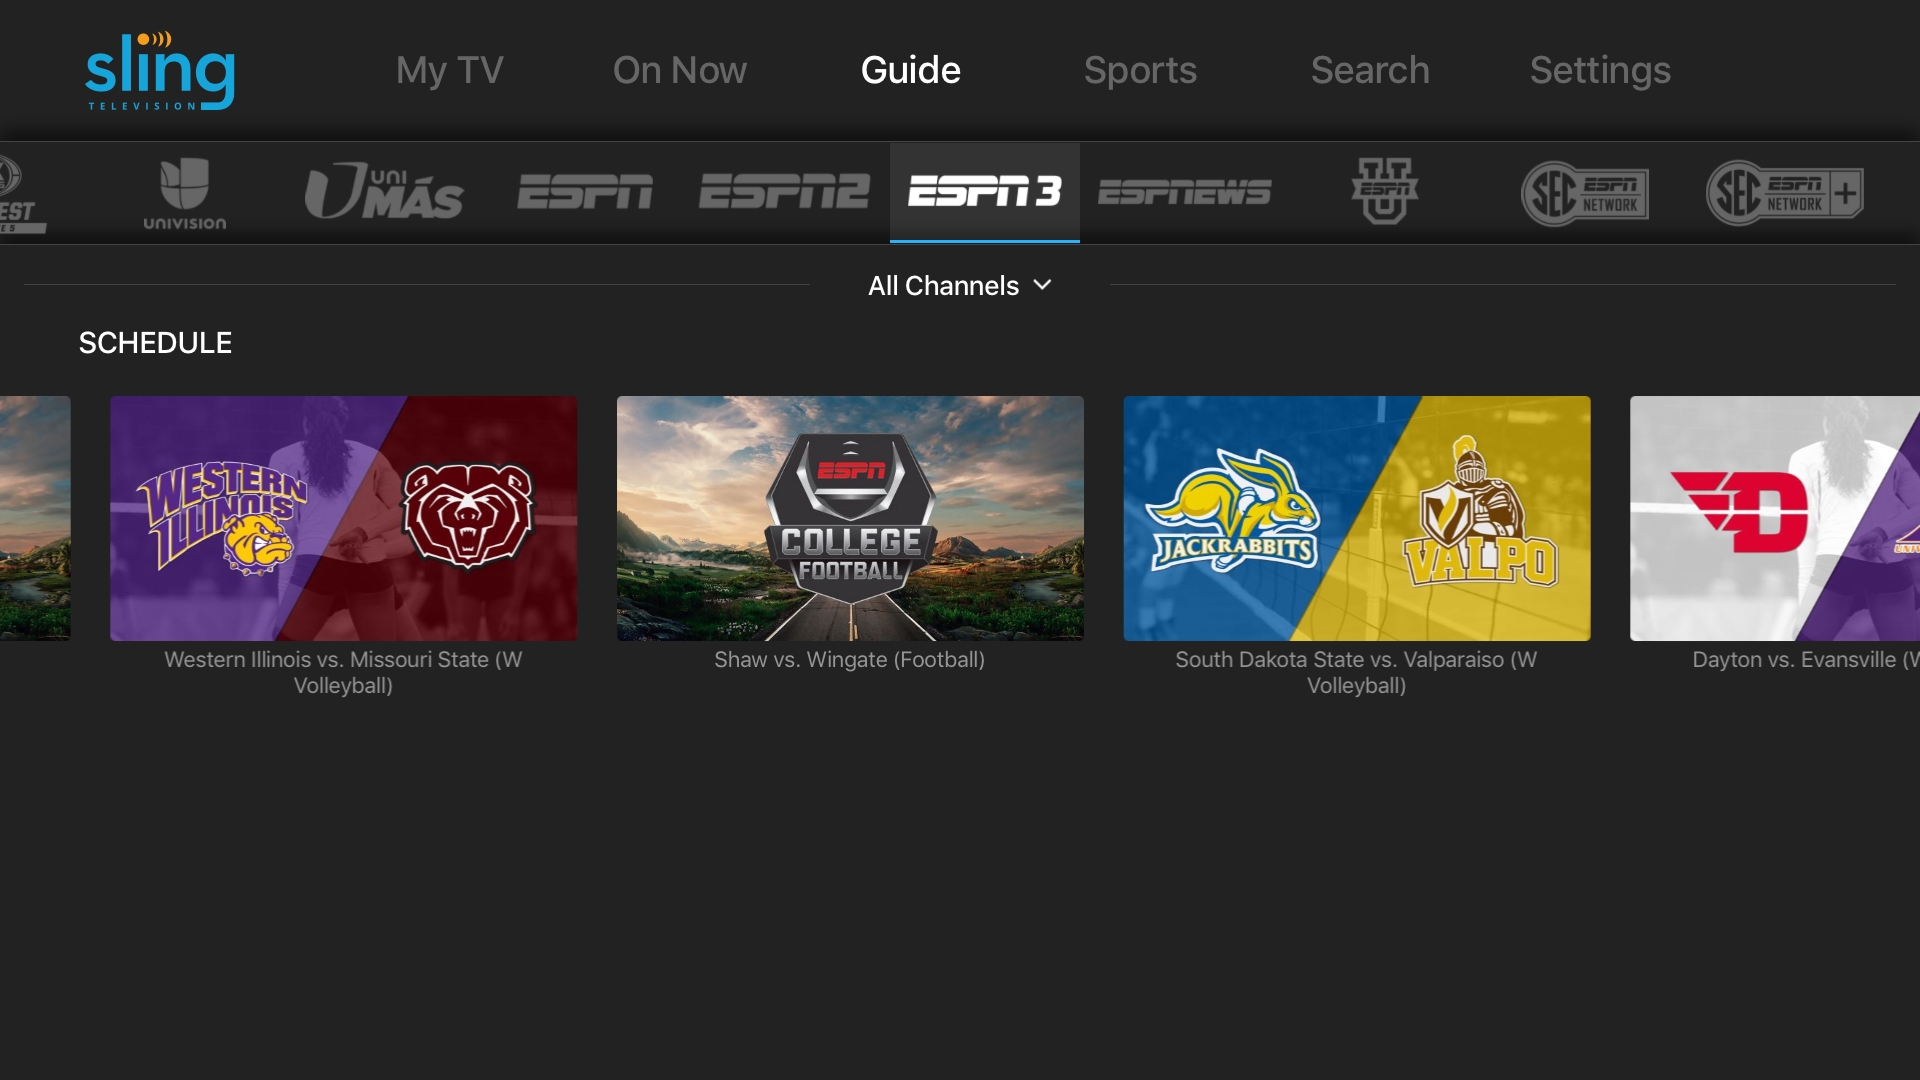 ESPN3 Content Joins Sling TV Channel Guide, a First for the Pay-TV Industry Business Wire